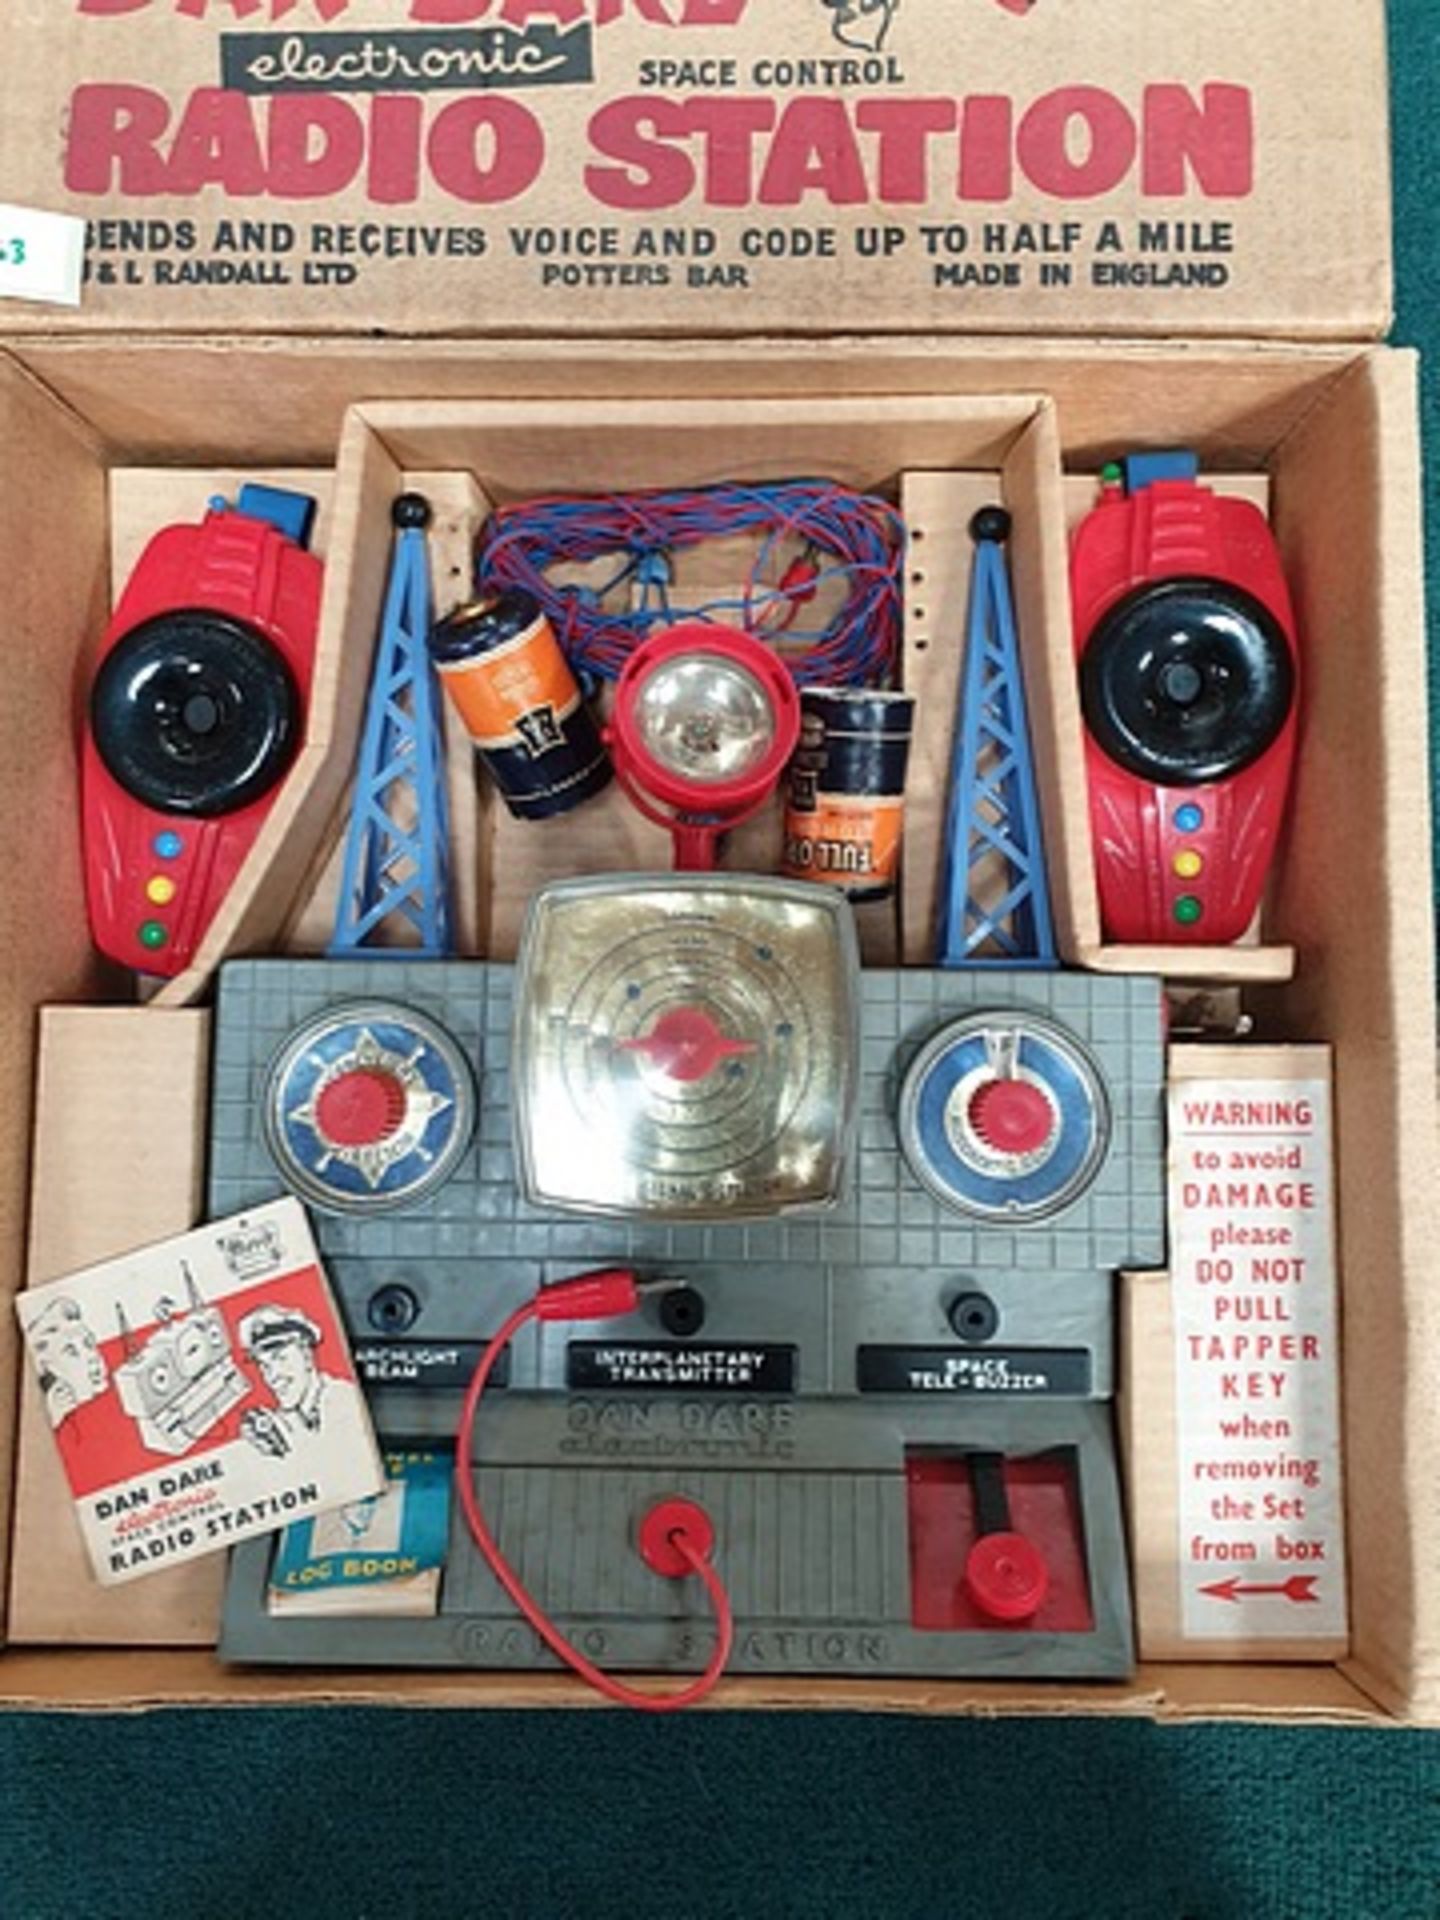 Merit Dan Dare Electronic Space Control Radio Station 1962 Complete With Box - Image 3 of 3